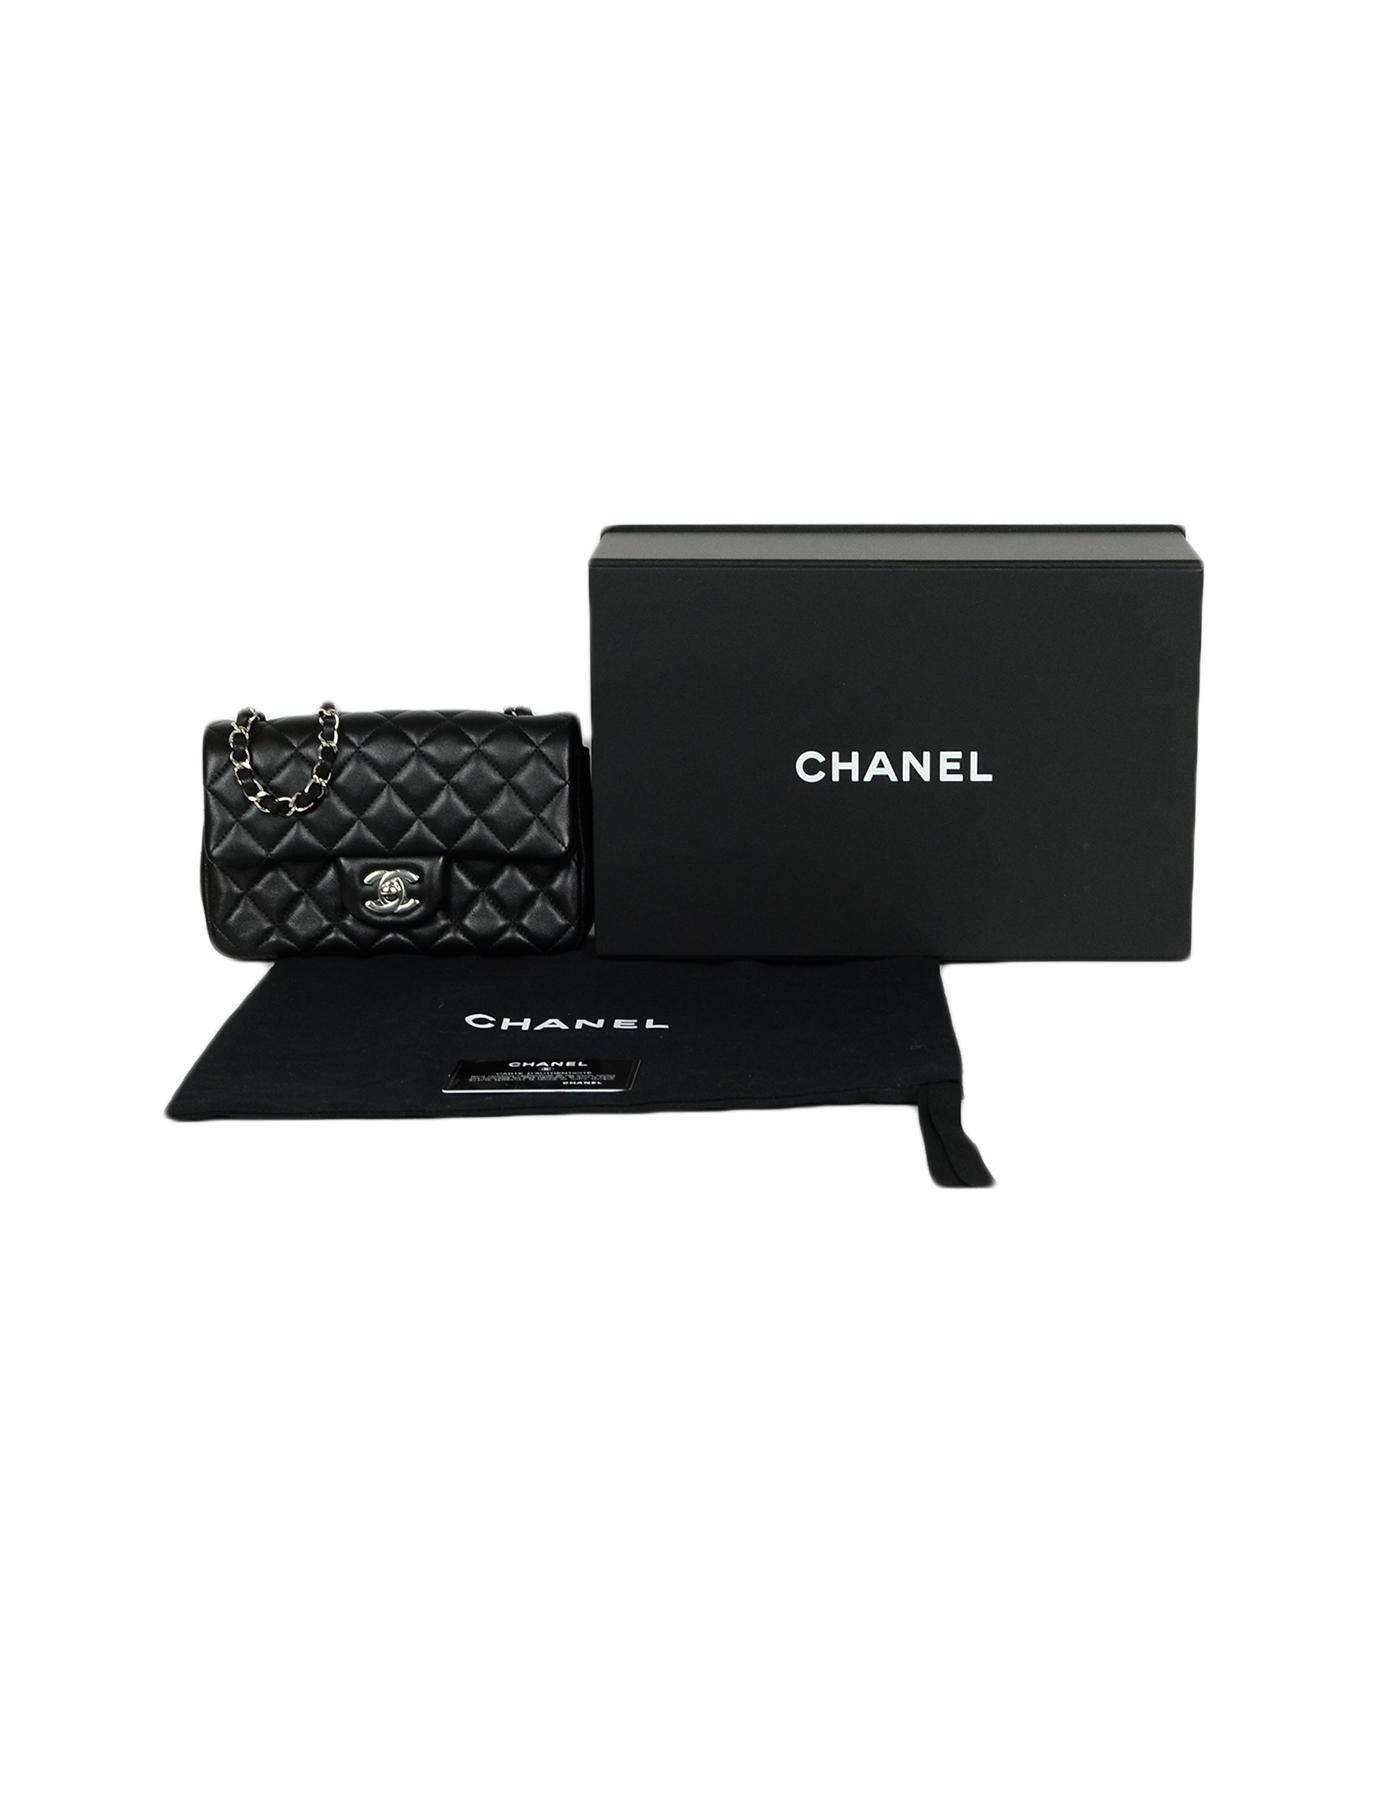 Chanel 2019 Black Lambskin Leather Quilted Mini Rectangular Classic Flap Bag 4